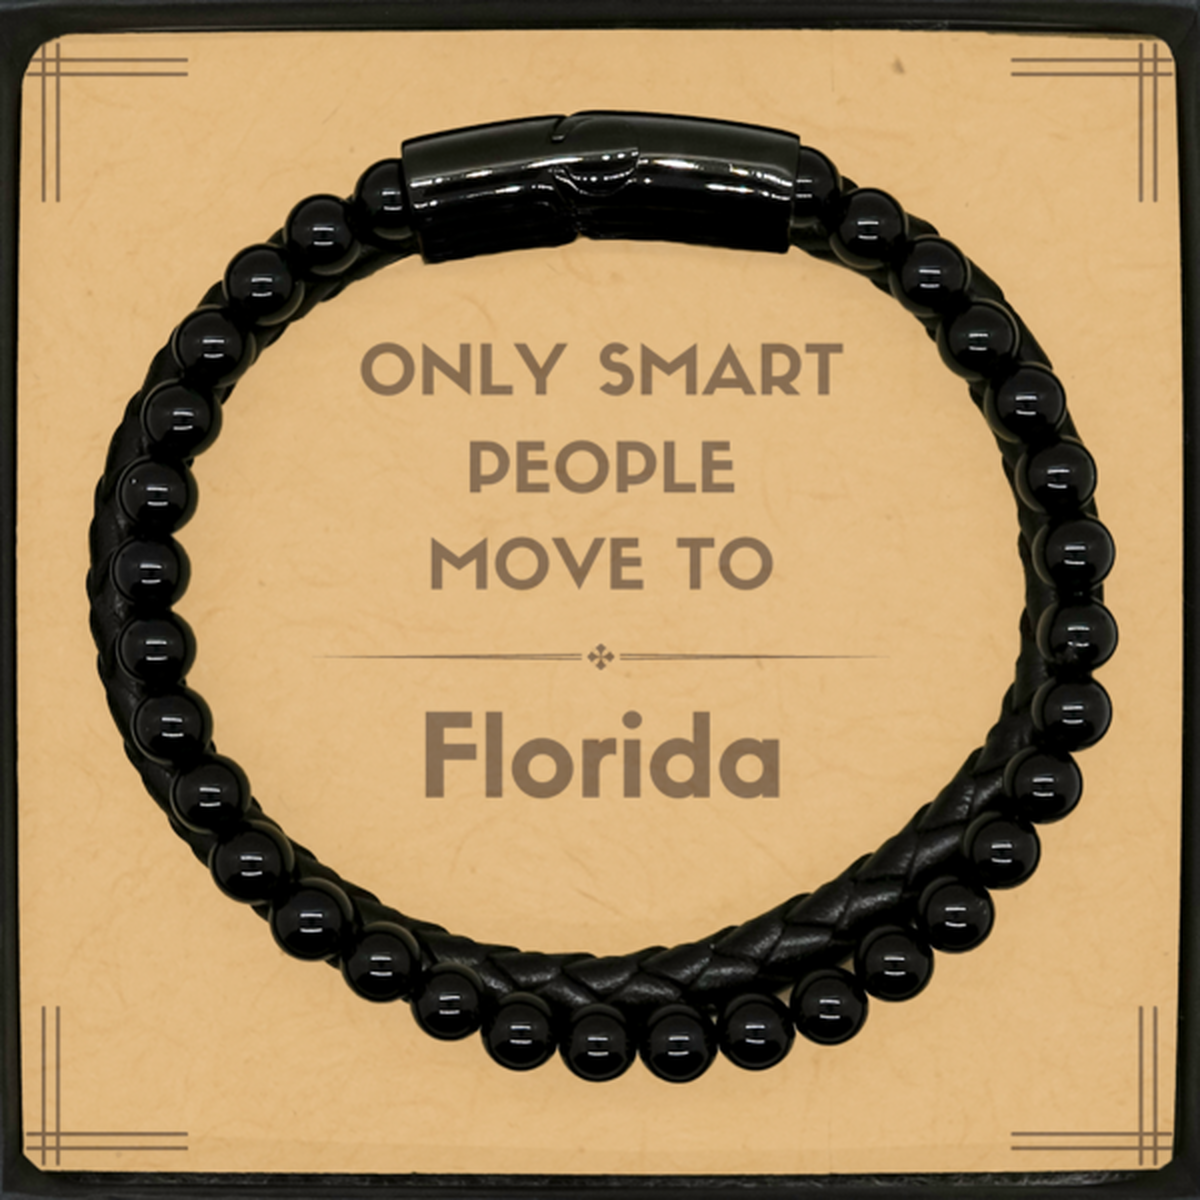 Only smart people move to Florida Stone Leather Bracelets, Message Card Gifts For Florida, Move to Florida Gifts for Friends Coworker Funny Saying Quote